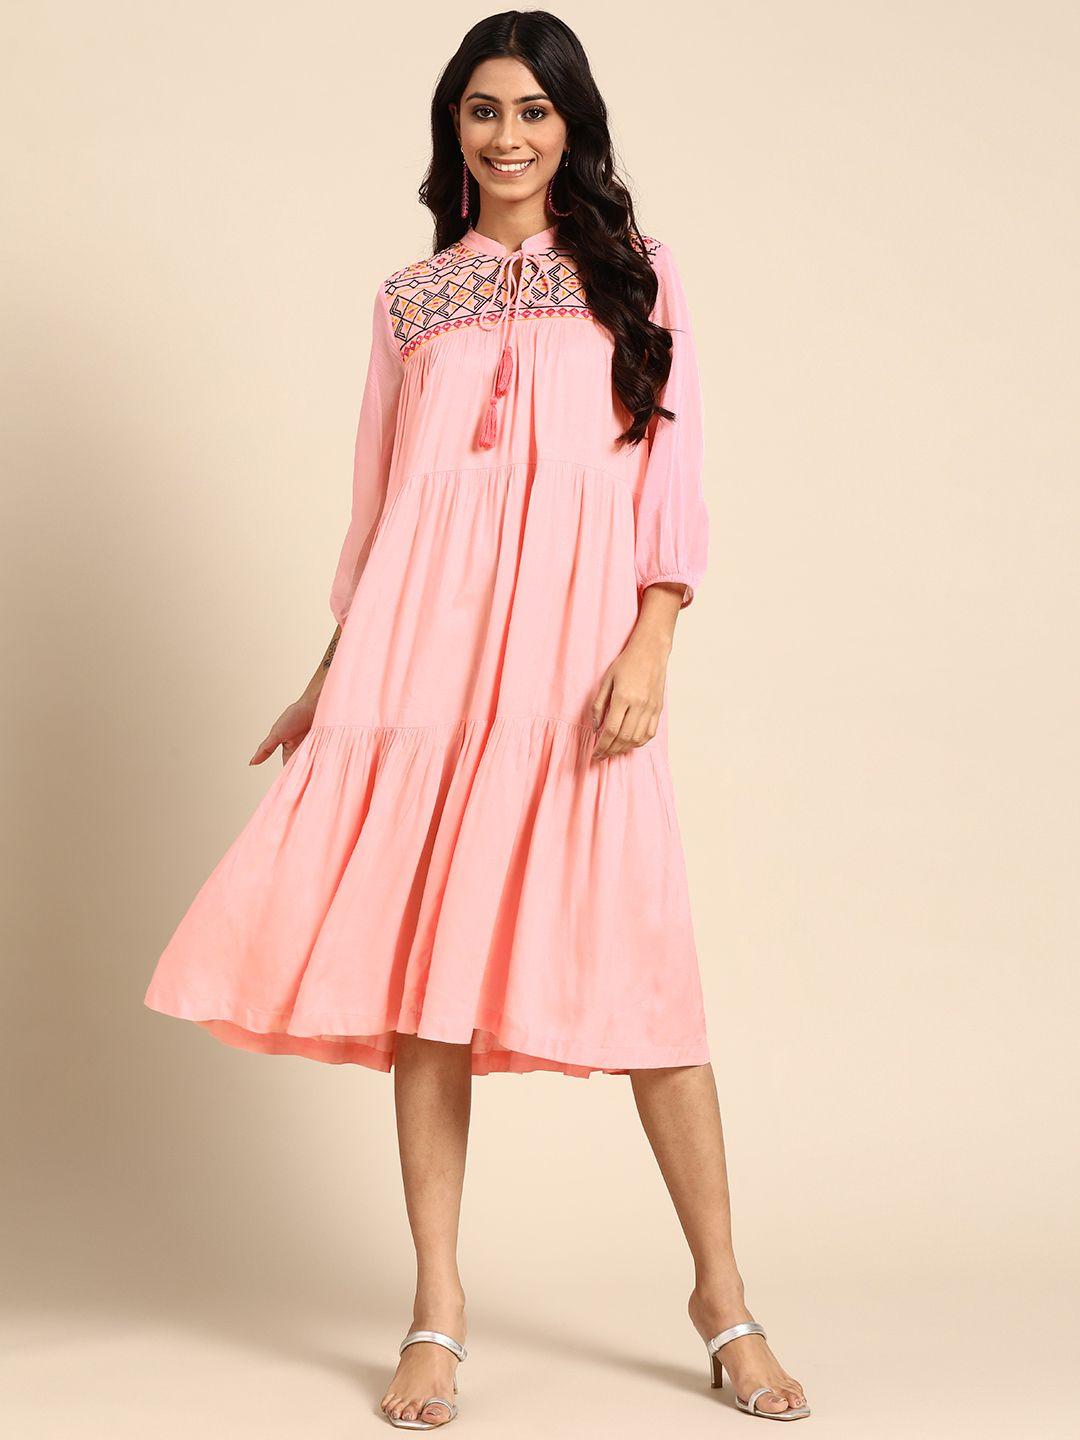 sangria-women-pink-ethnic-motifs-embroidered-tiered-ethnic-dress